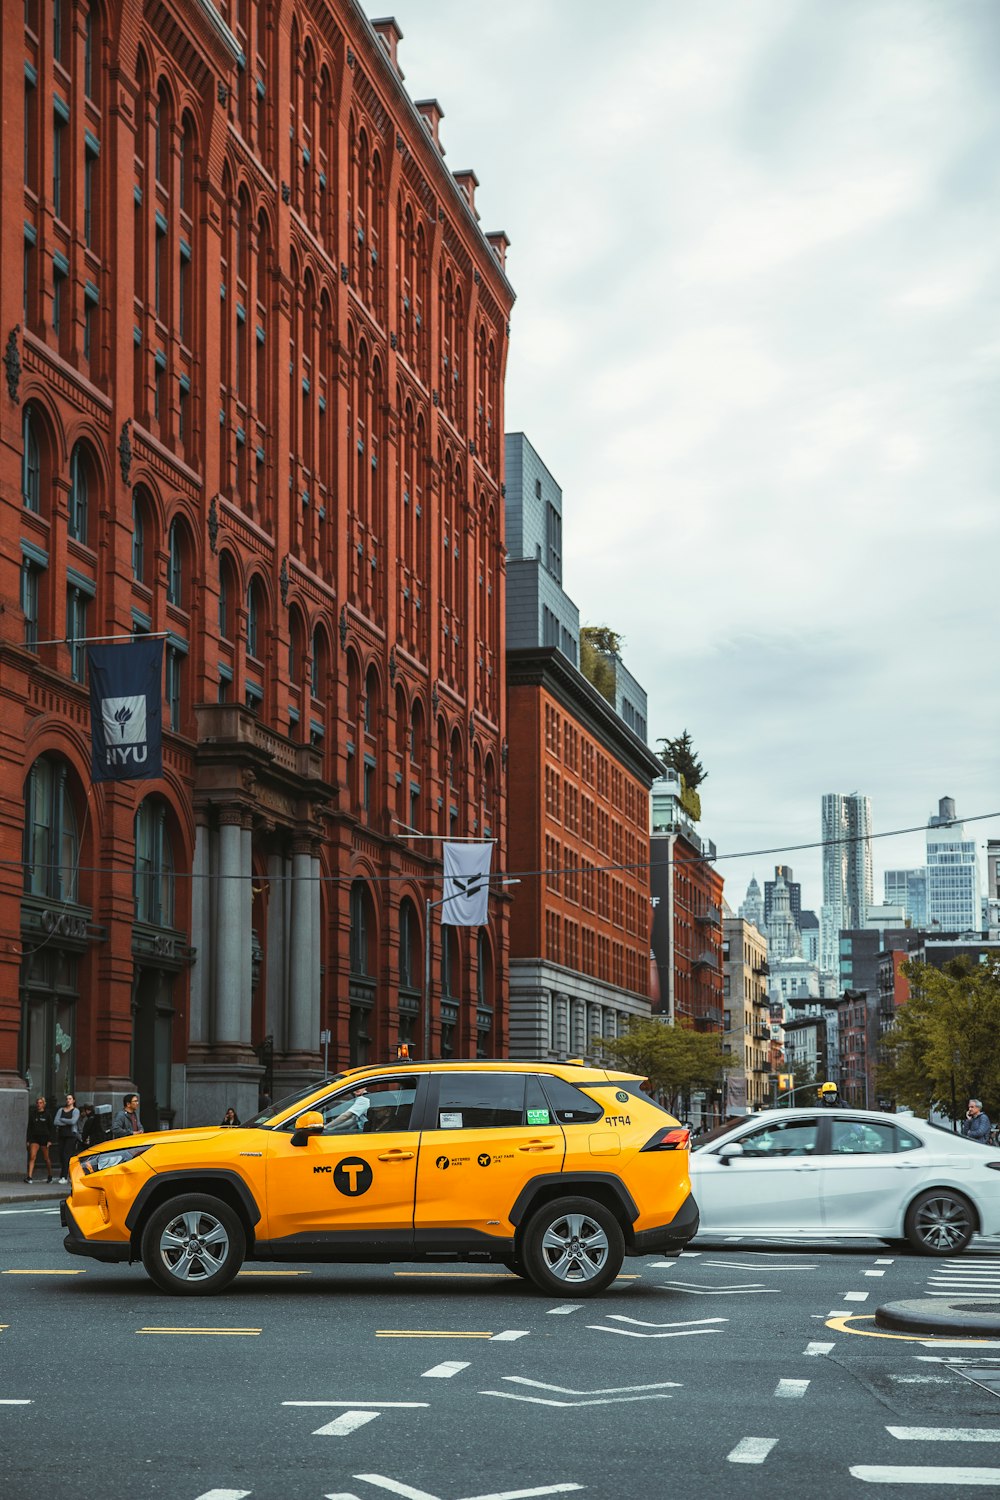 a yellow taxi on a street